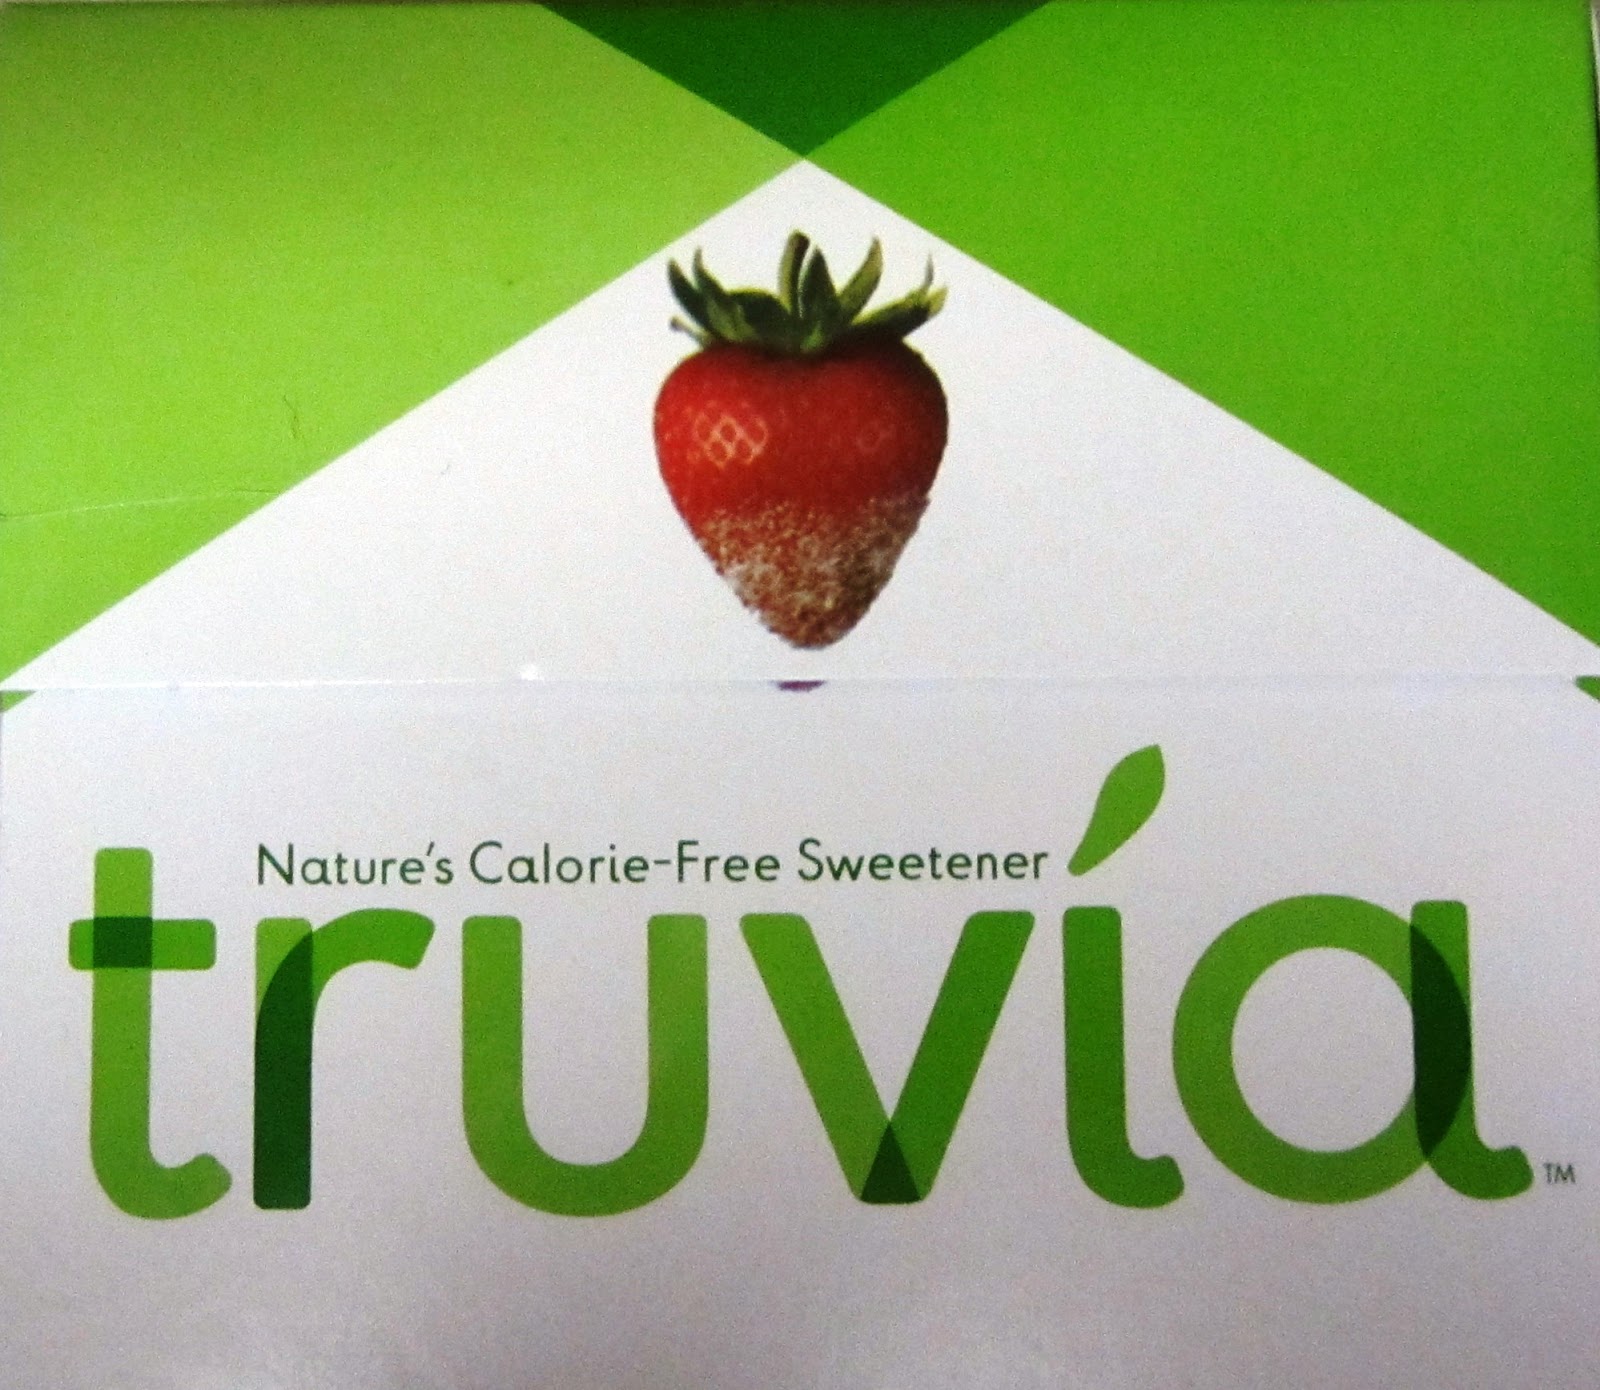 Are there side effects from using Truvia sweetener?